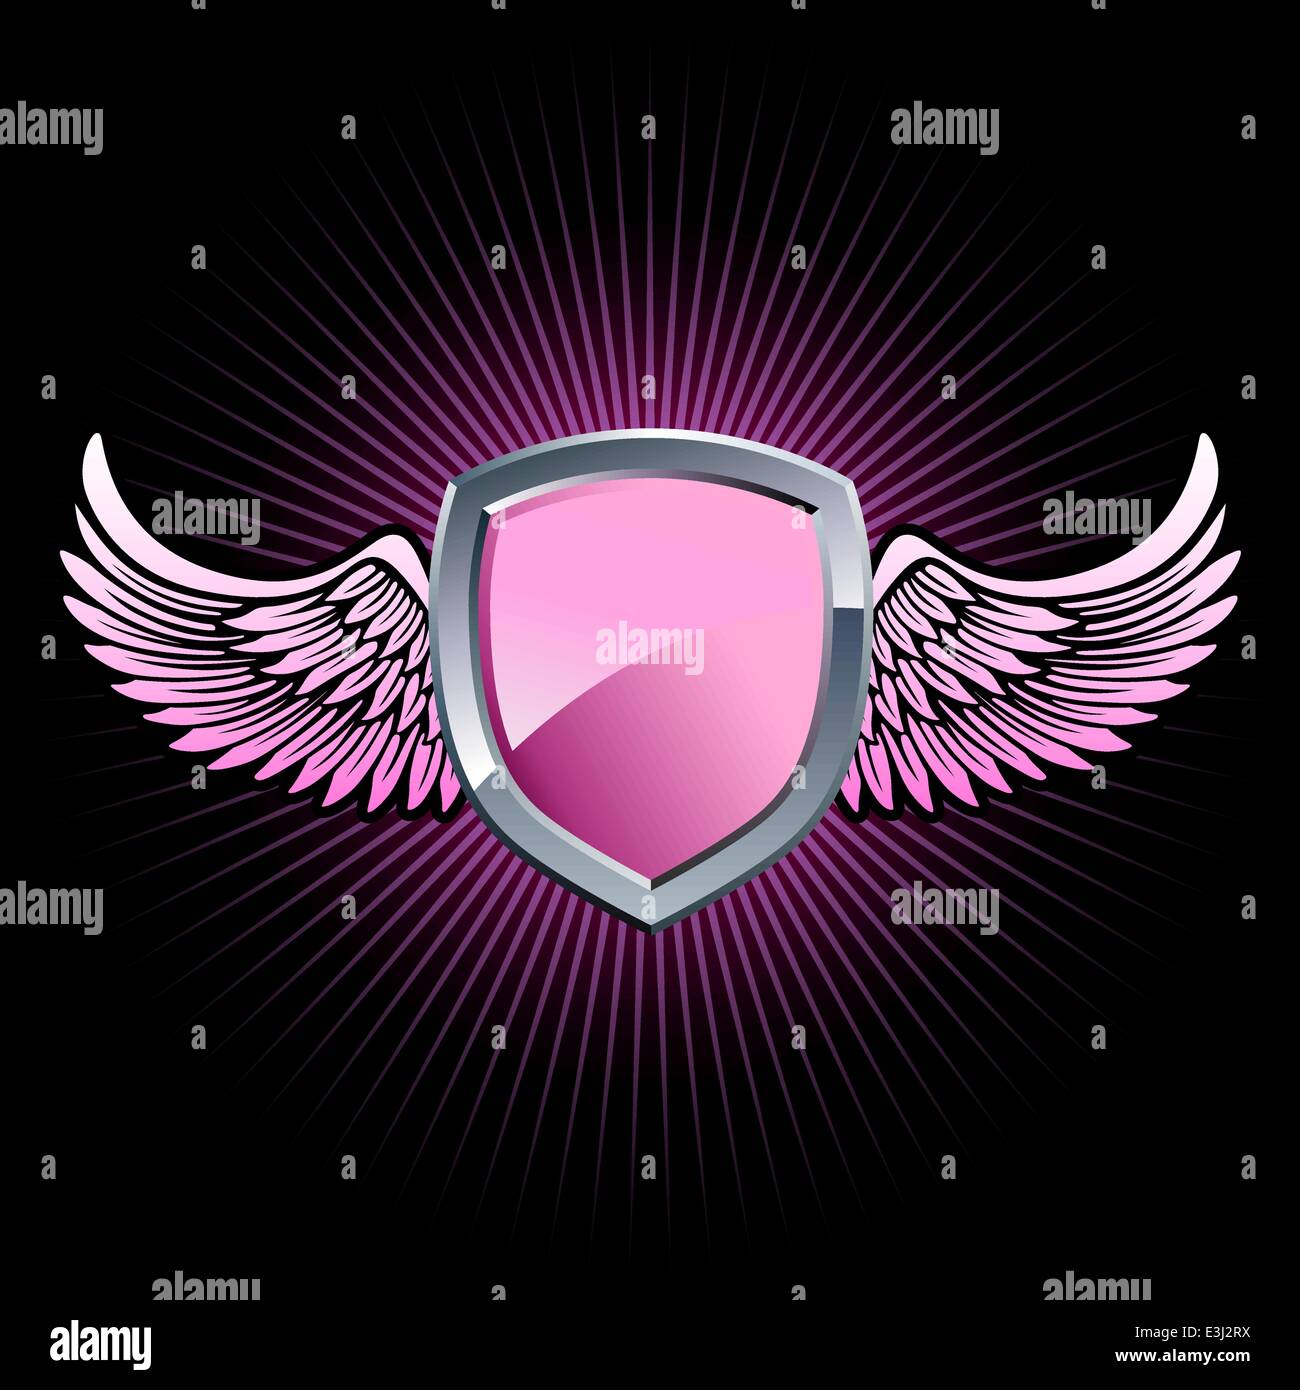 Glossy pink and silver shield emblem with background wings Stock Vector